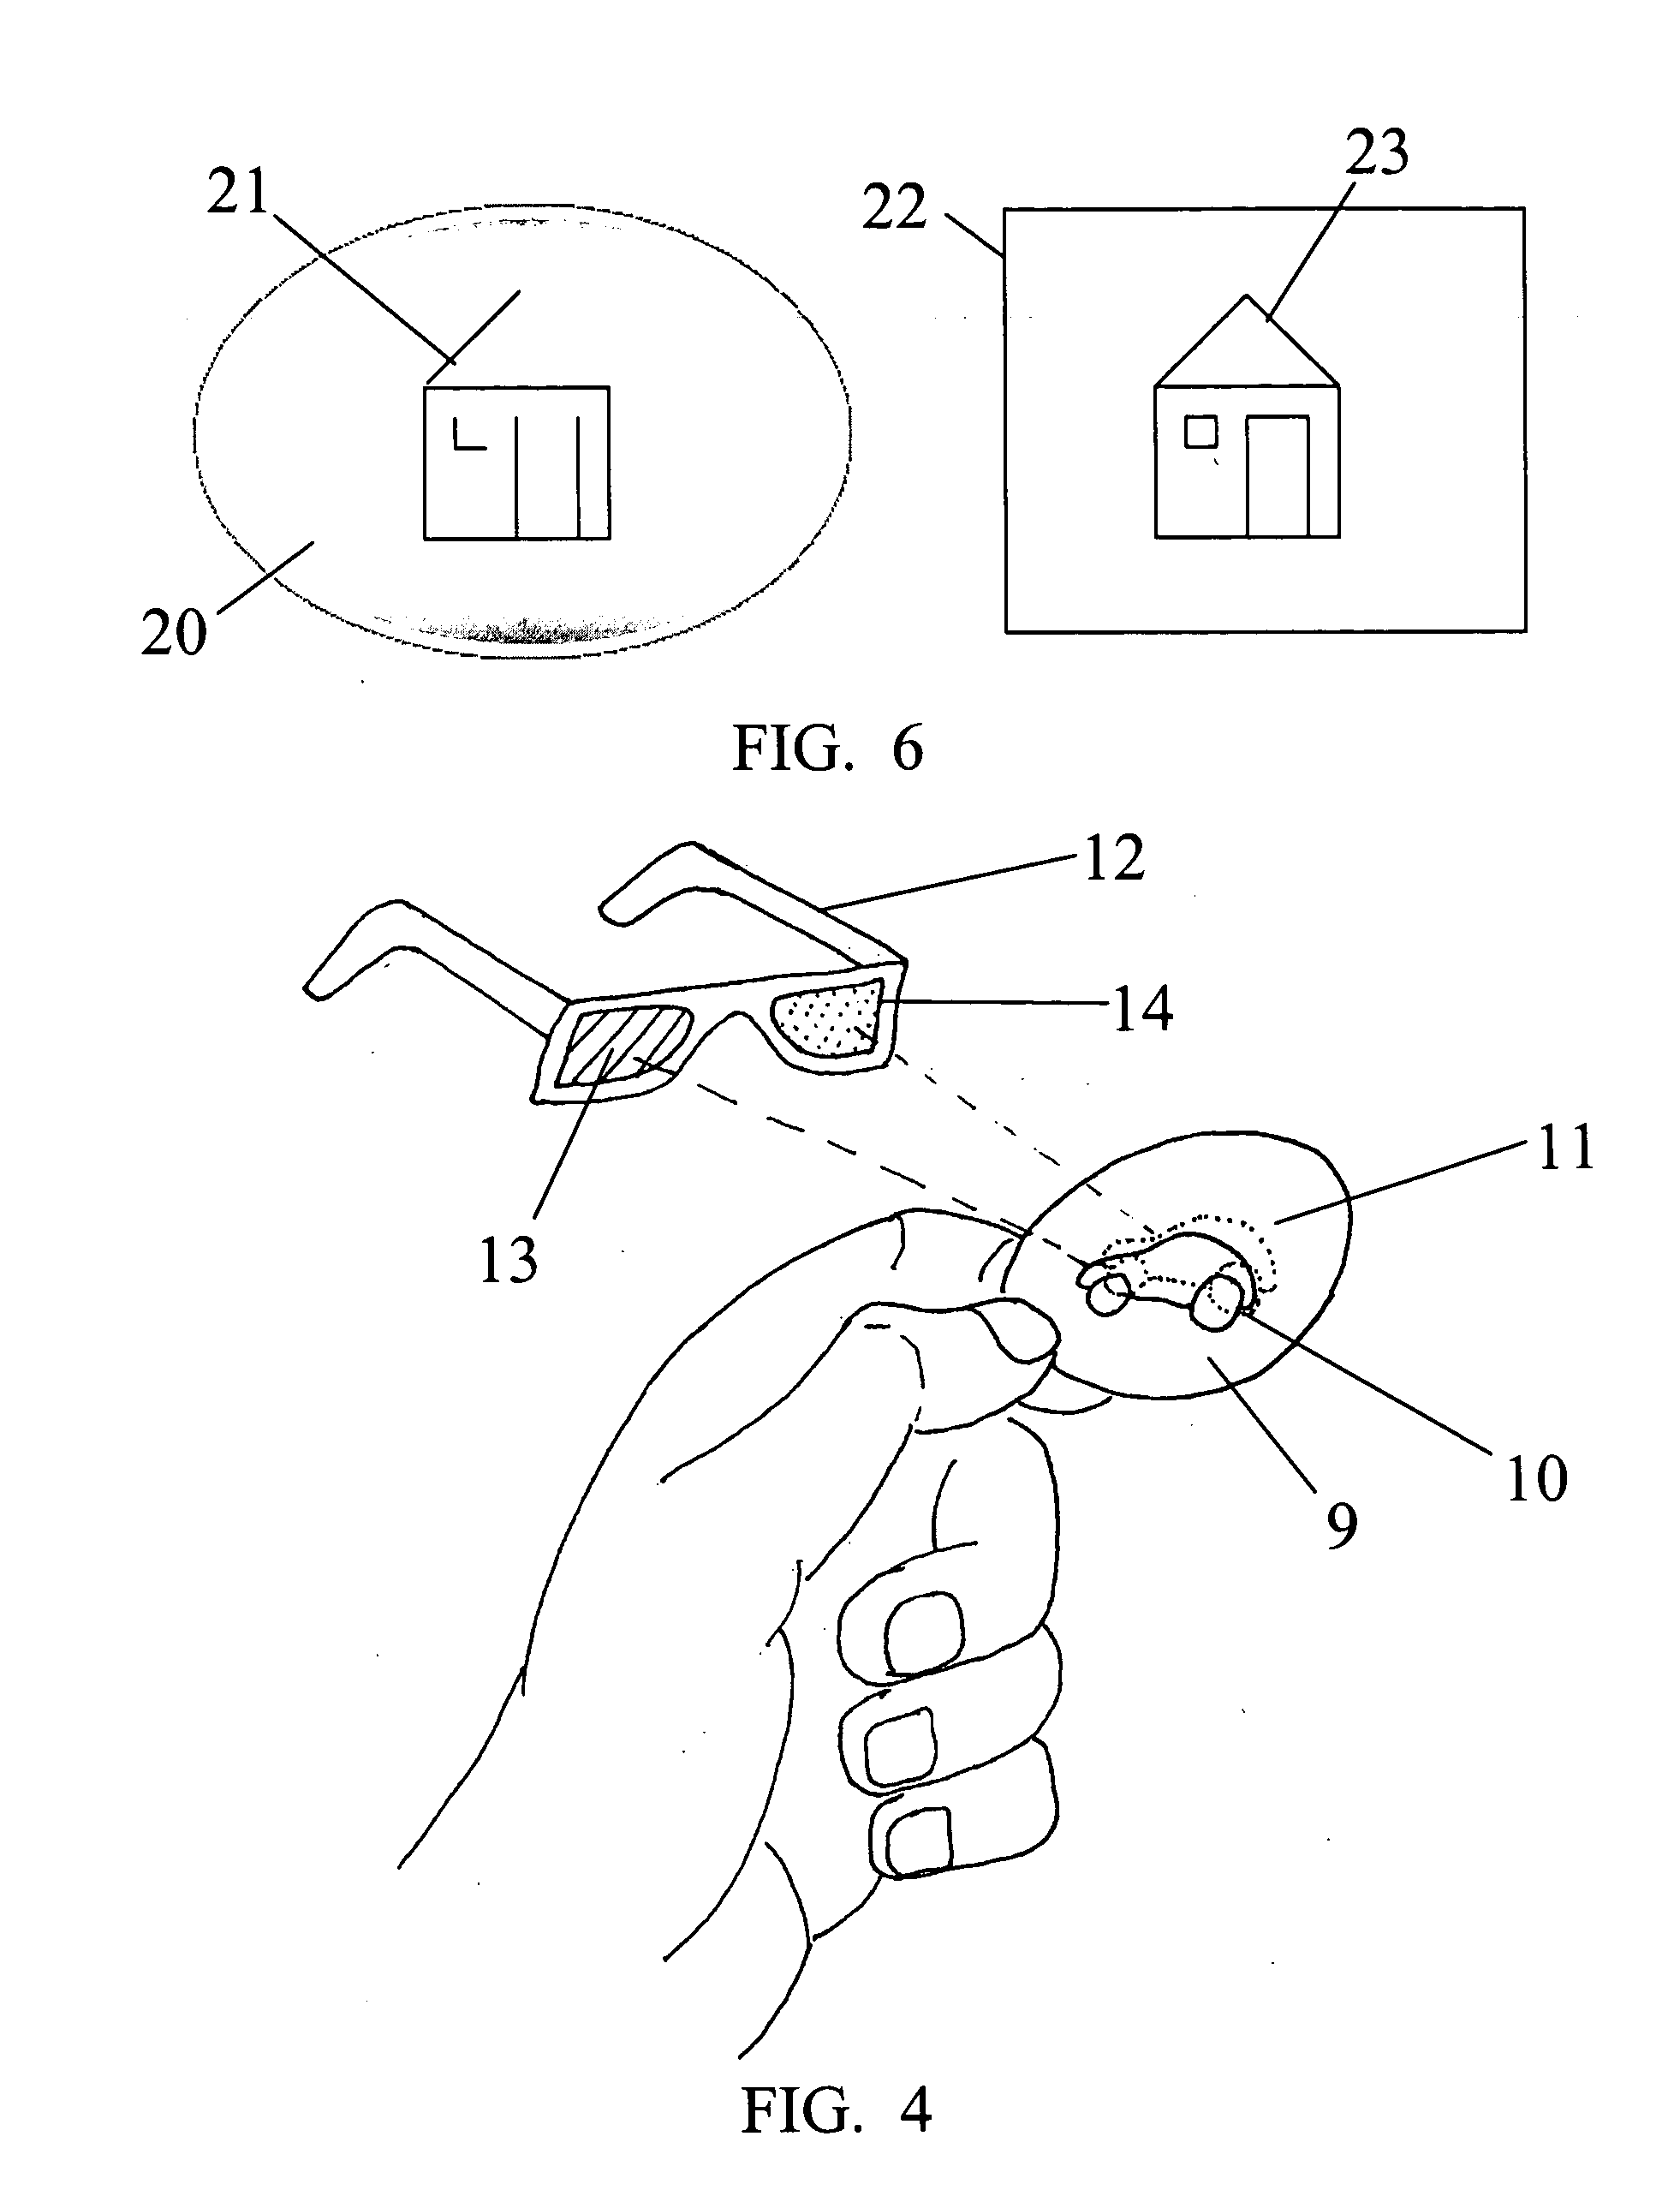 Article of commerce comprising edible substrate, image, and message